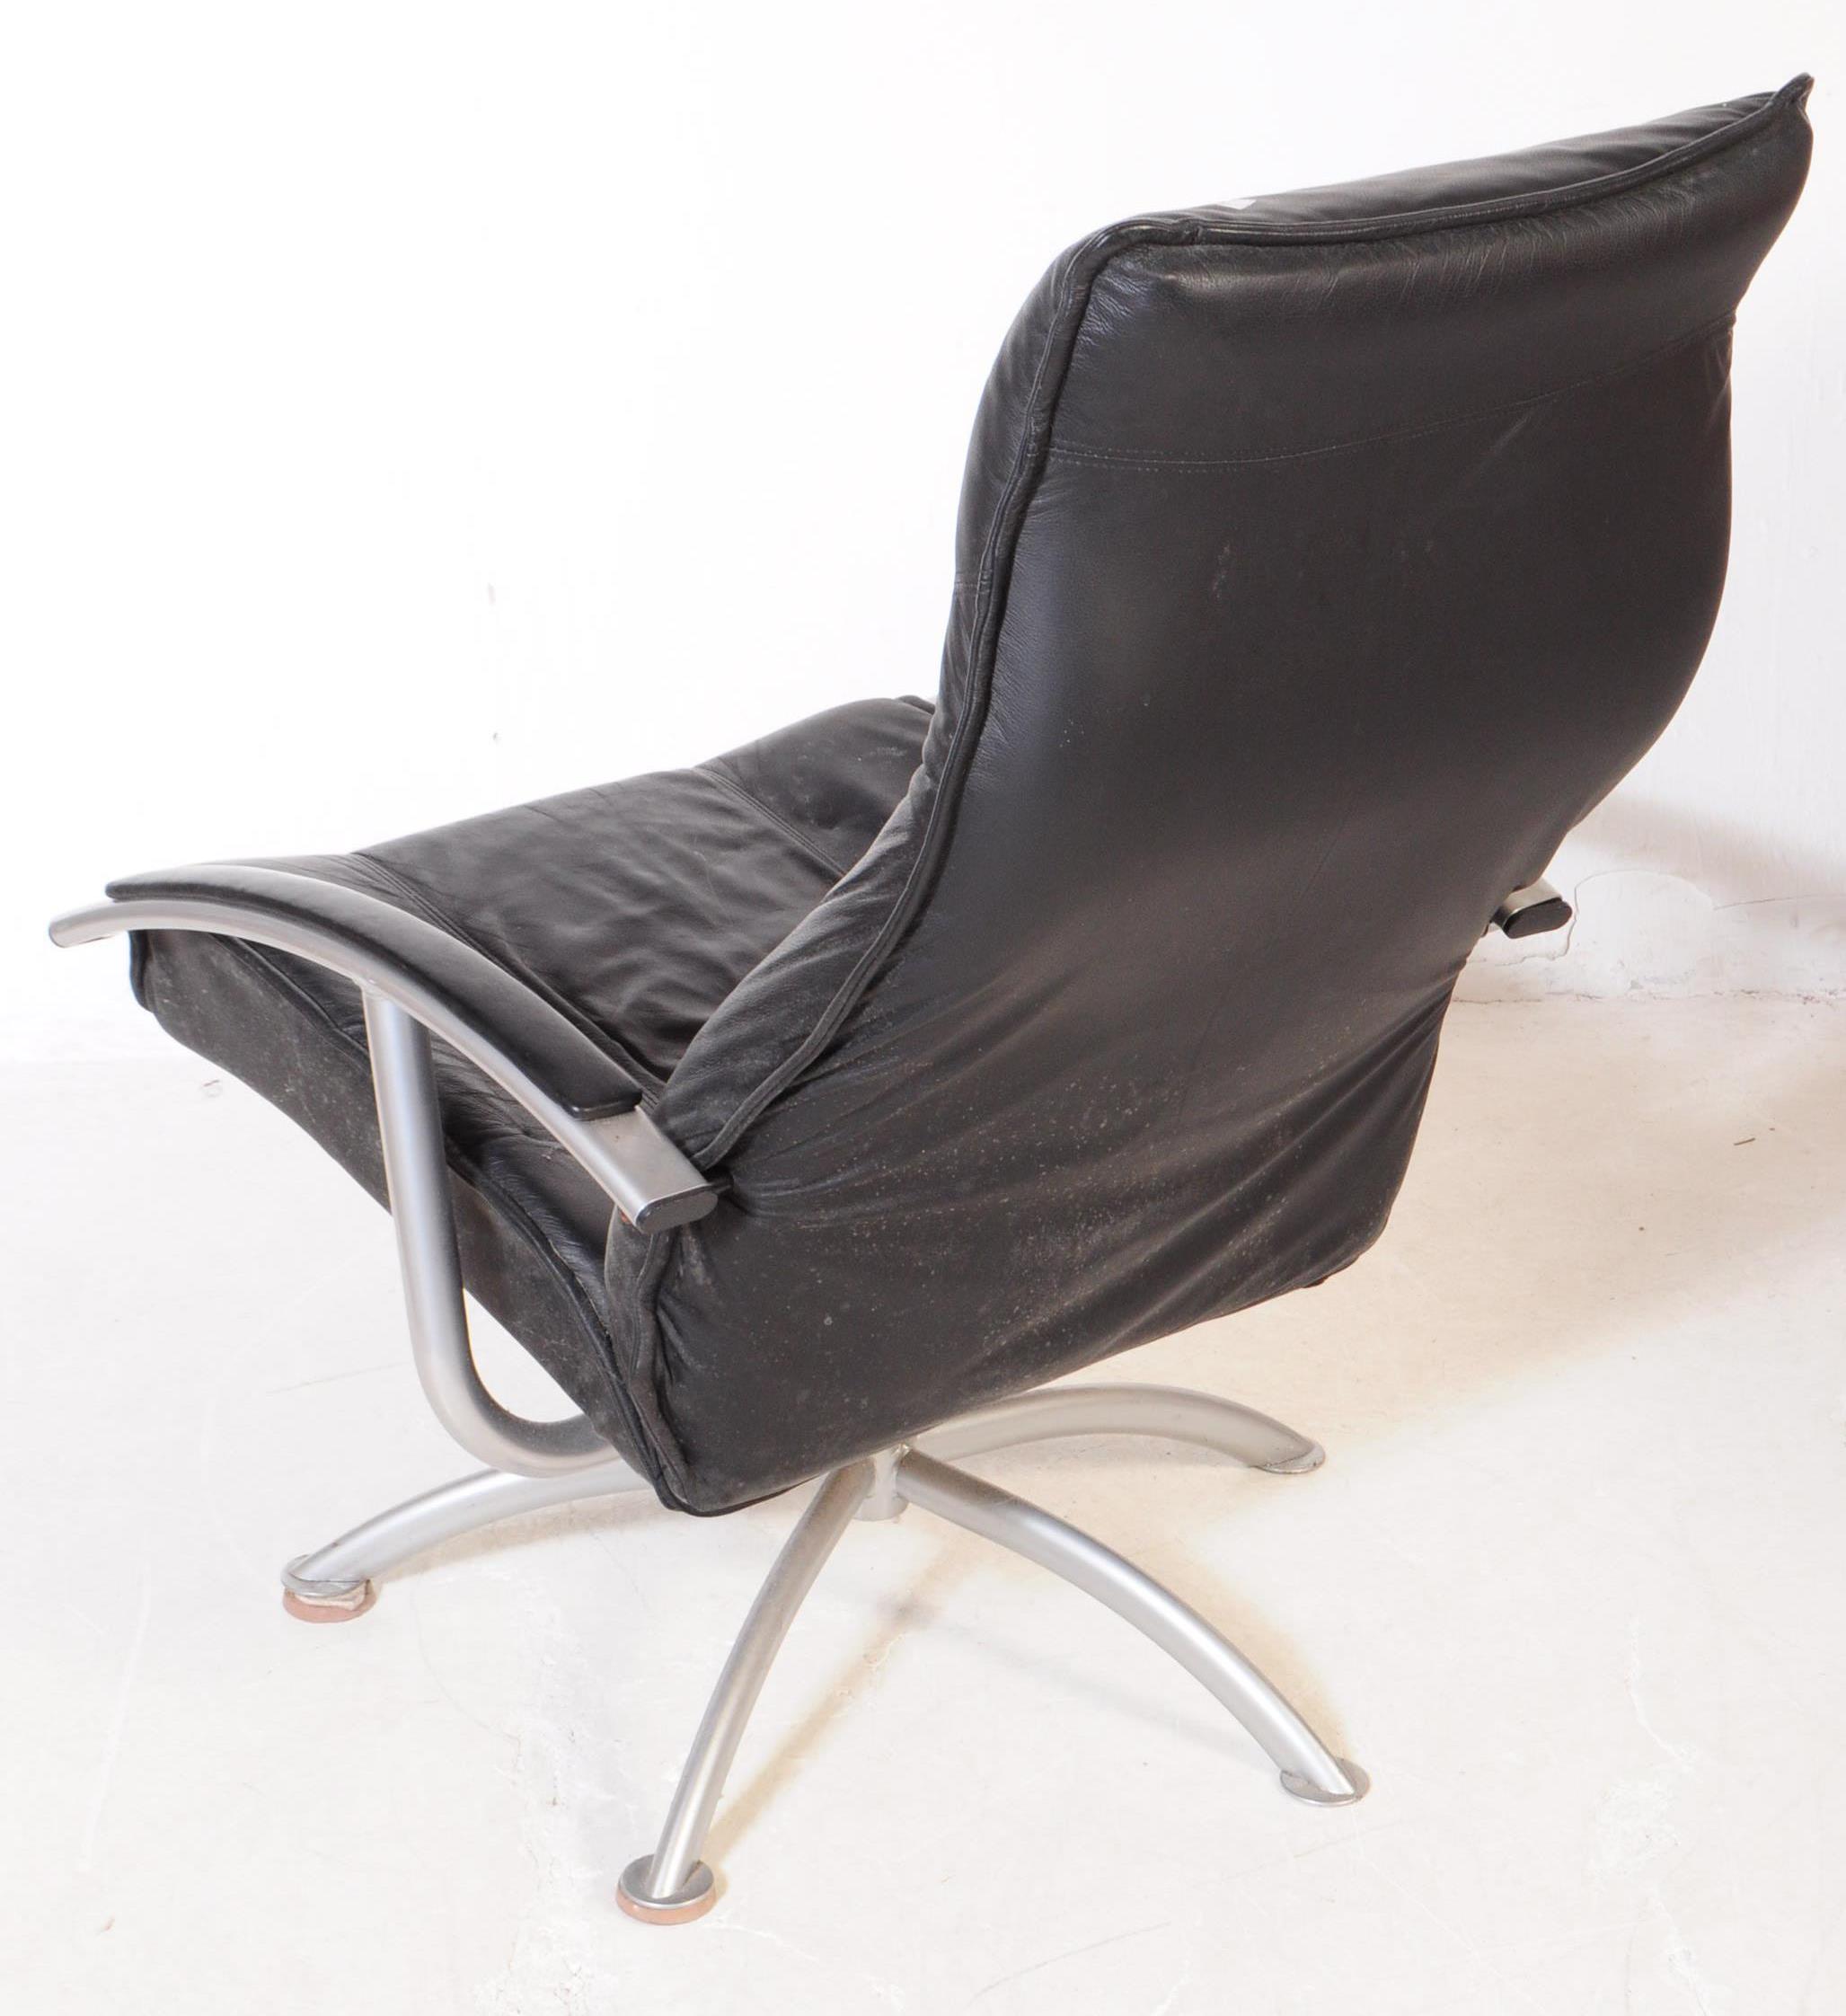 CONTEMPORARY LEATHER SWIVEL ARMCHAIR - Image 4 of 4